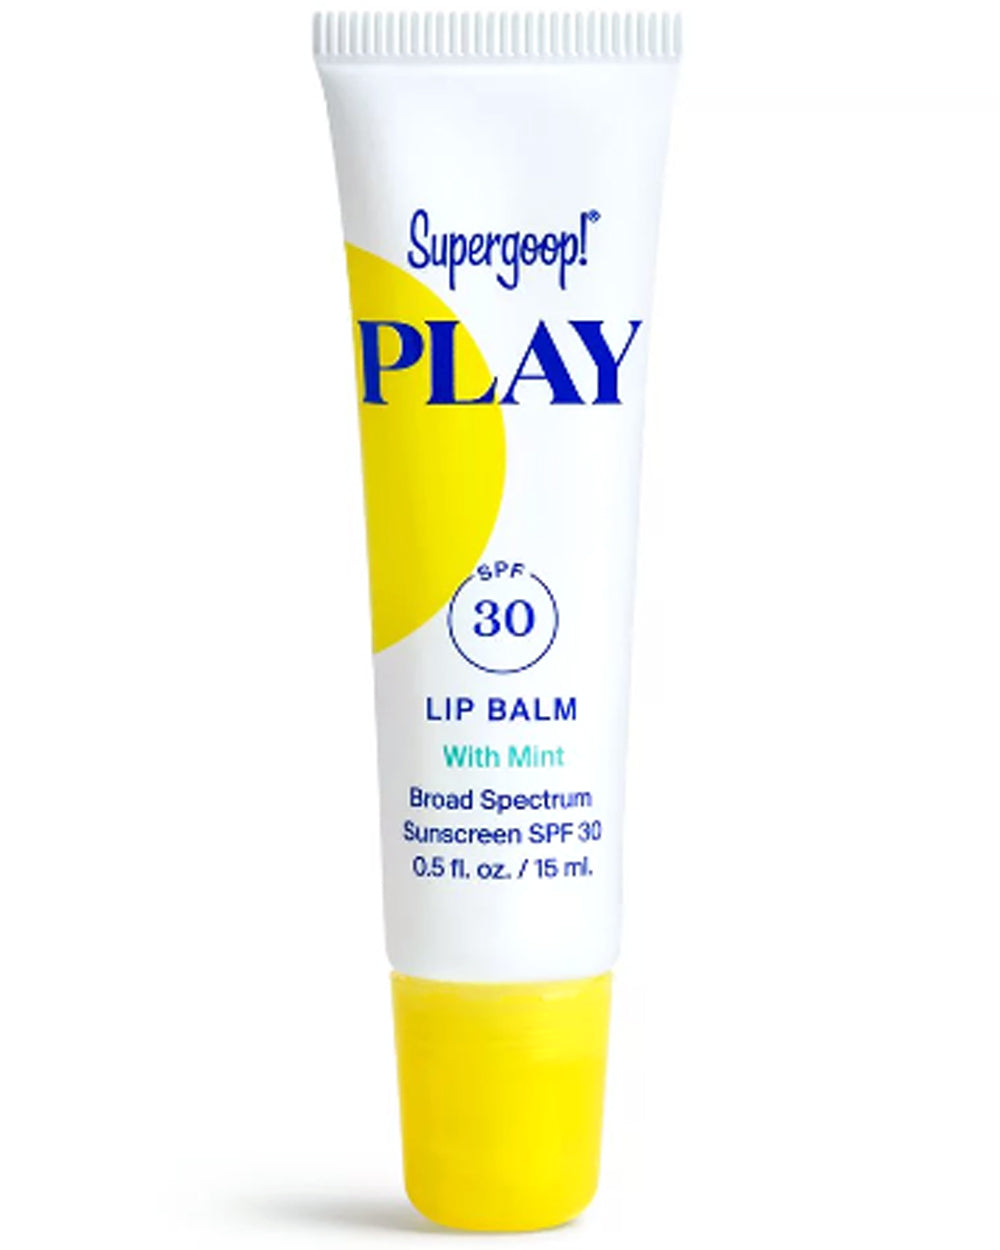 Play Lip Balm SPF 30 with Mint